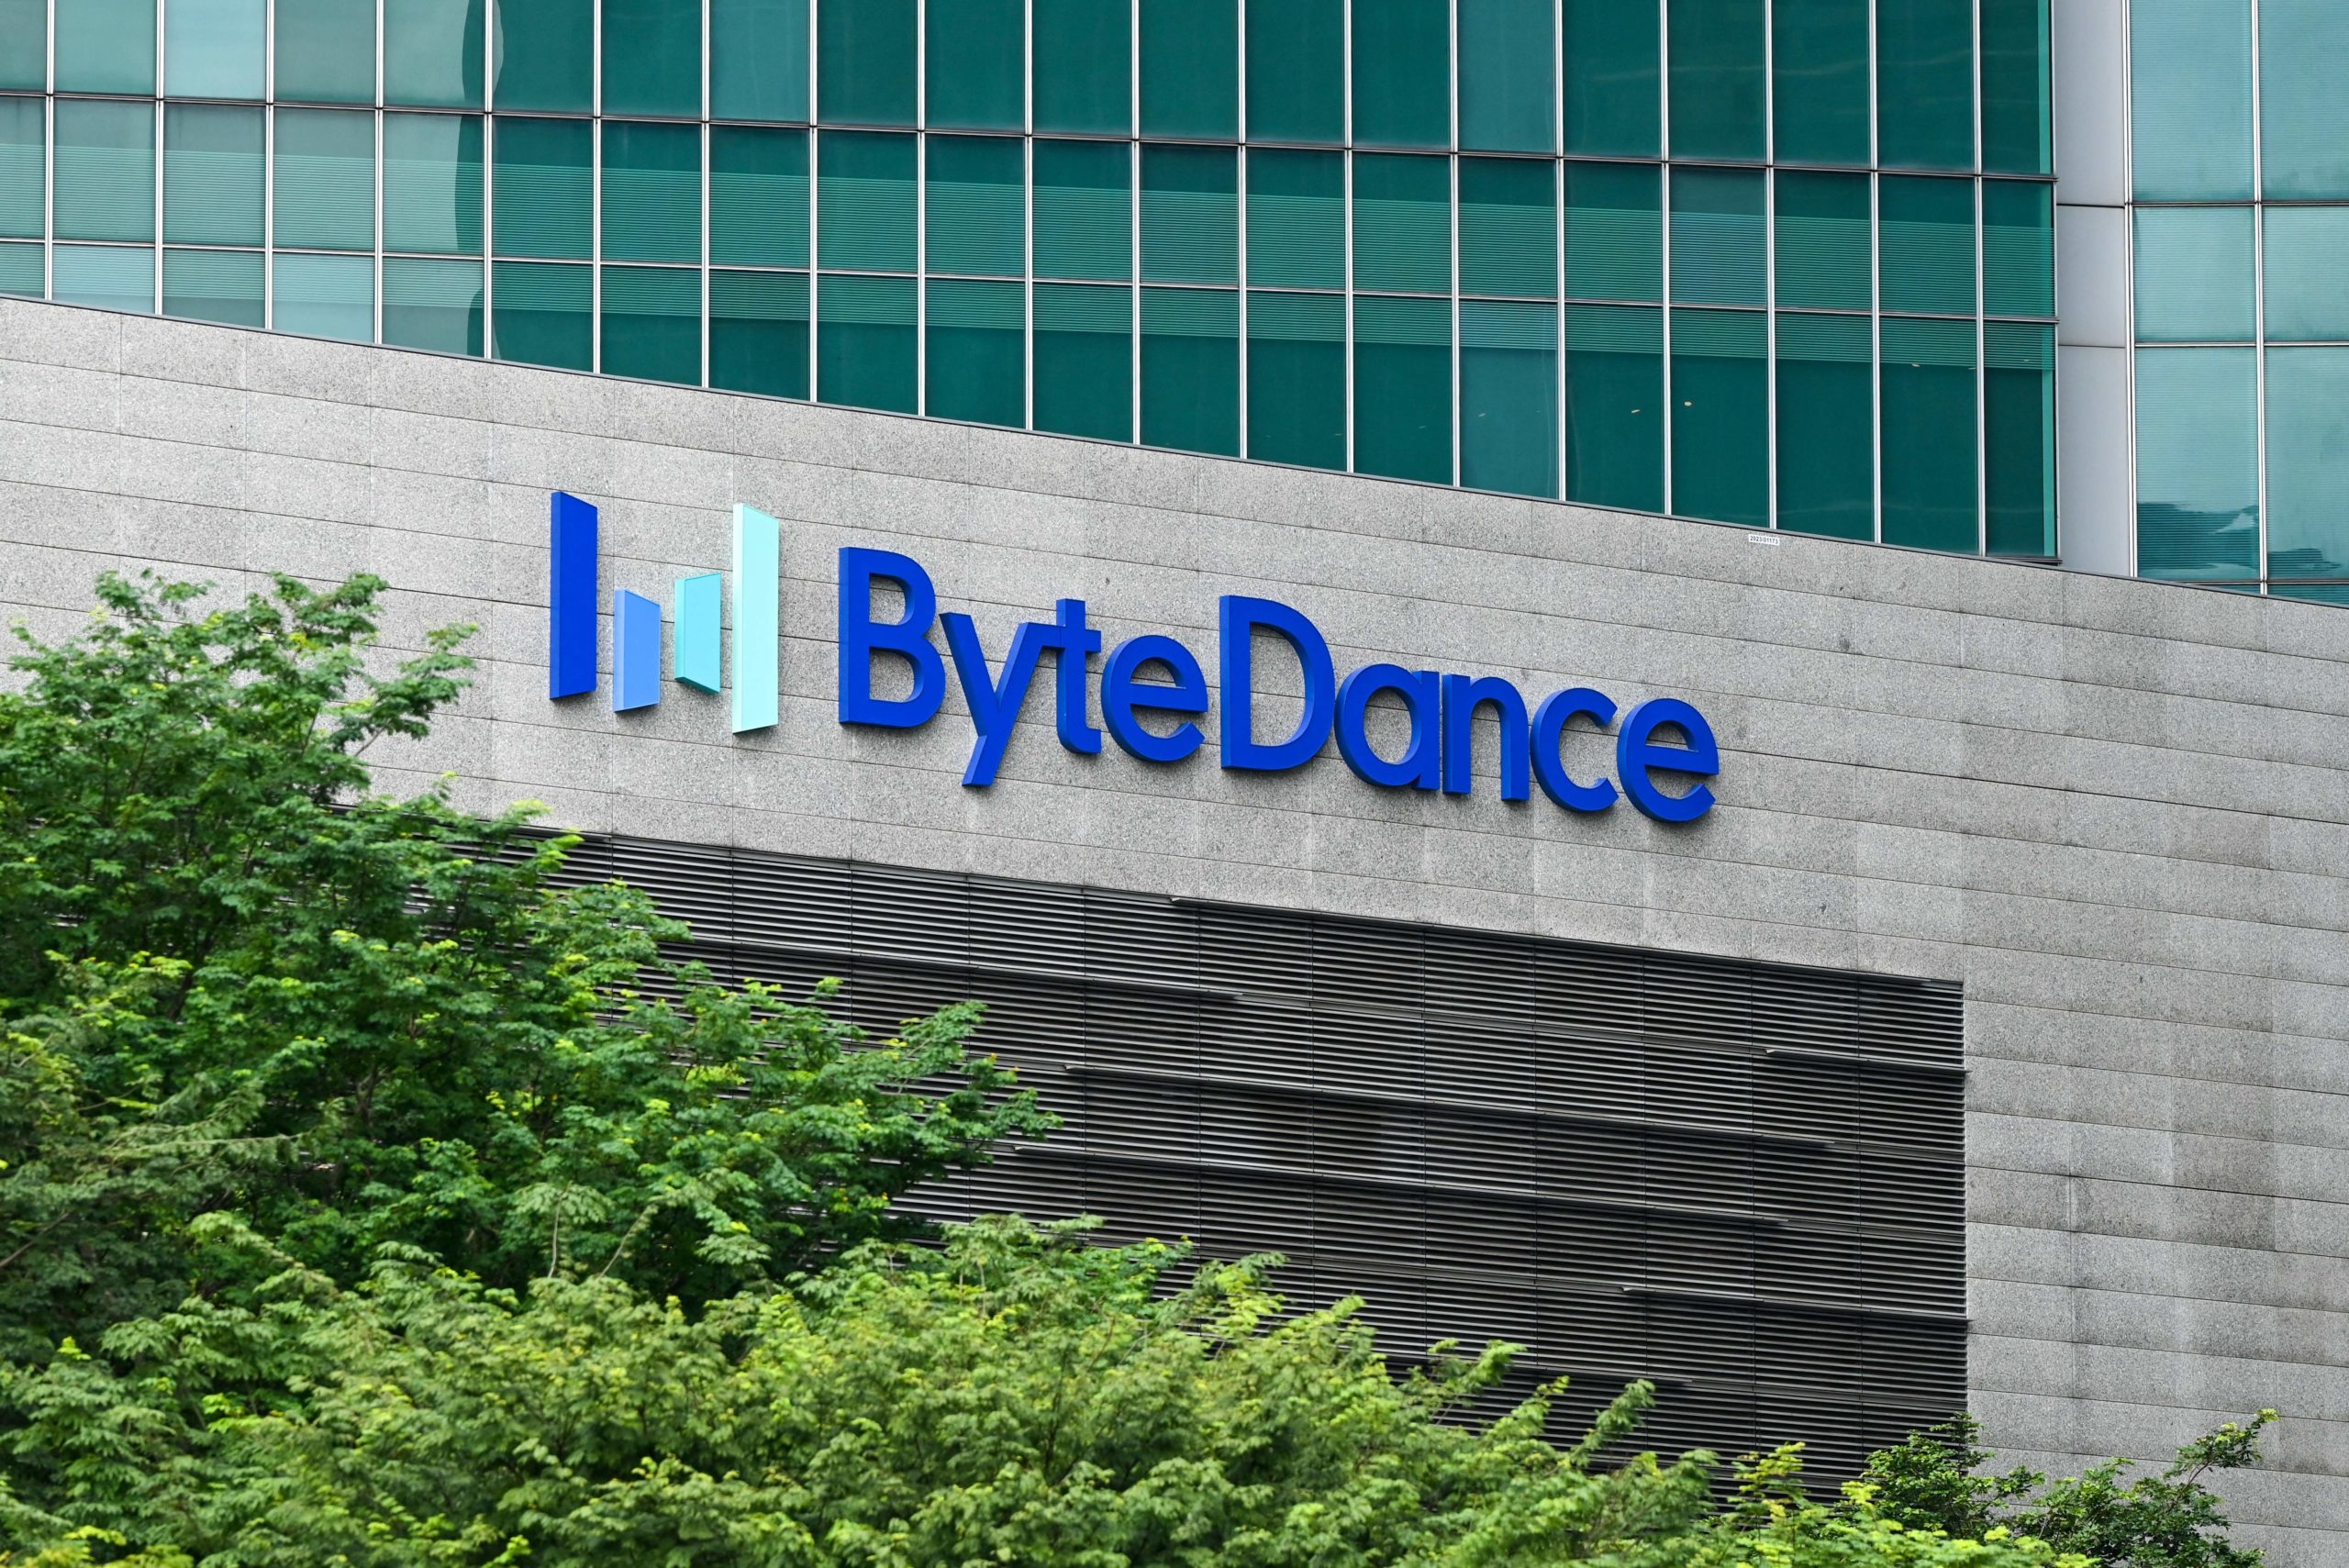 A logo of ByteDance is seen on the building of the company's office in Singapore on Sept. 7. ByteDance owns the popular video-sharing app TikTok.